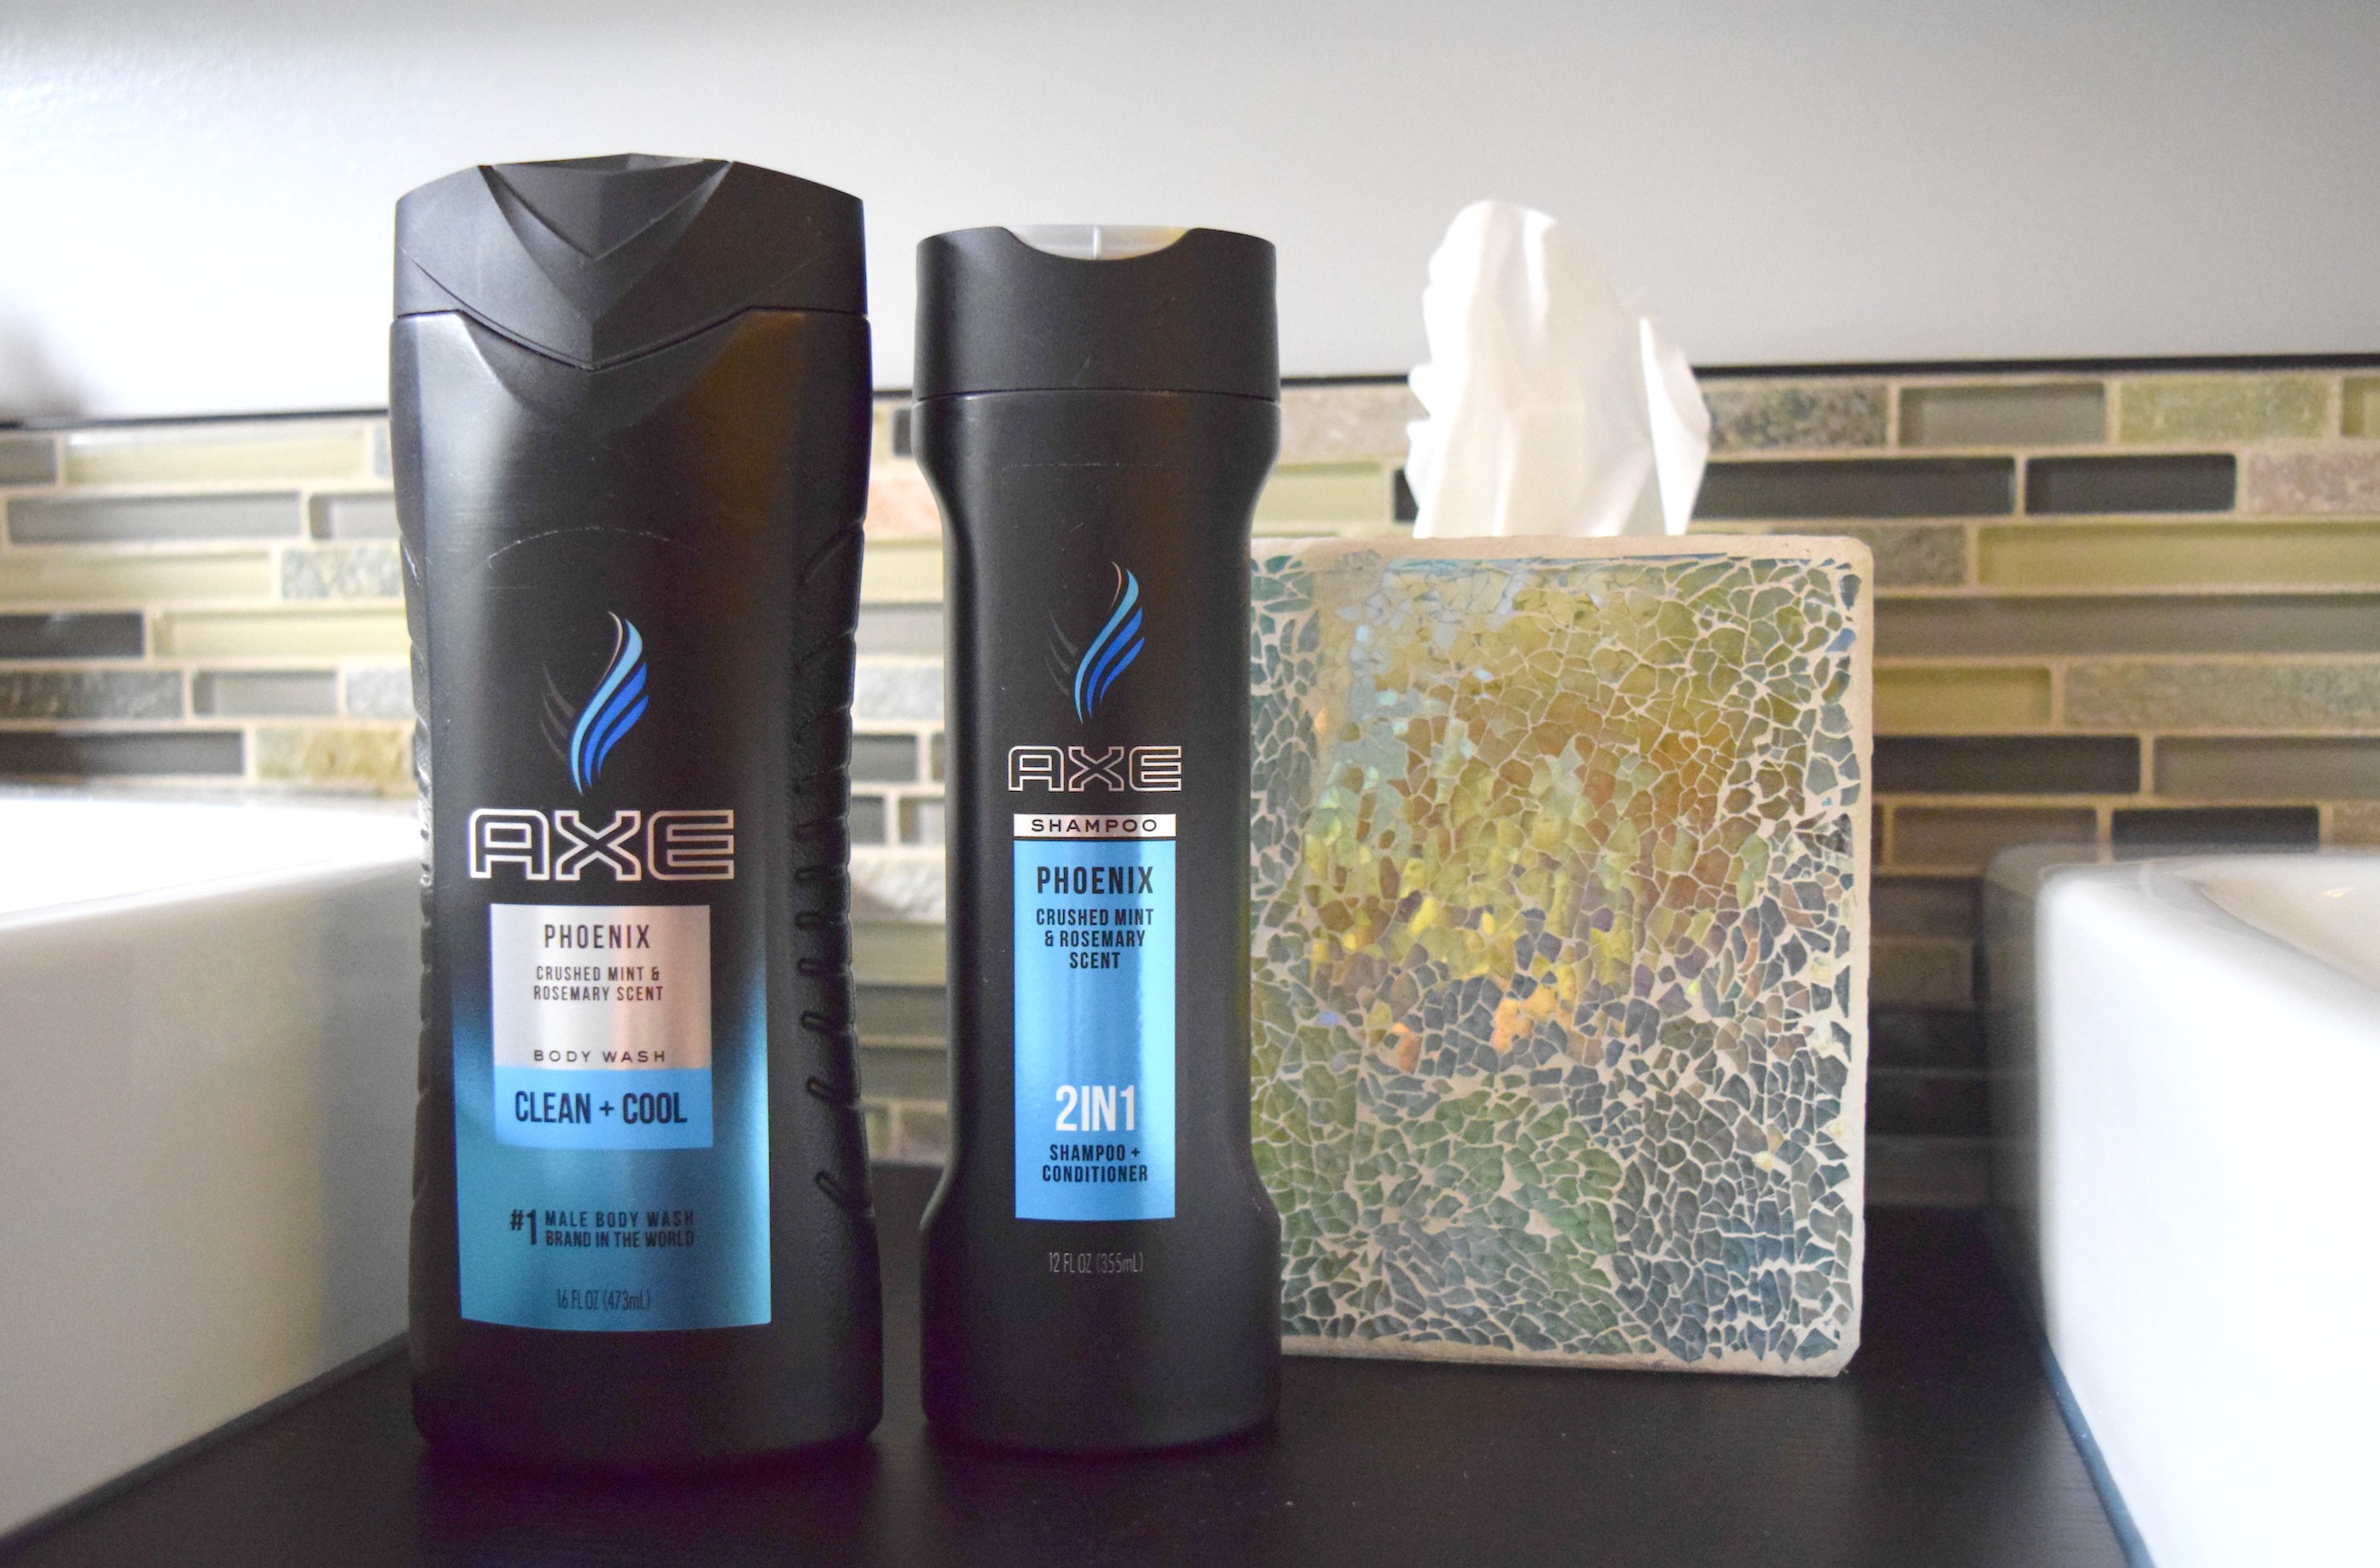 As we tackle this new school year, let’s not forget to remind our kids the importance of daily personal grooming. Here are some back to school personal grooming tips with AXE Blue Phoenix products! #AXEplanations #backtoschool #grooming #groomingtips #personalcare #bathandbody #AD #sponsored 